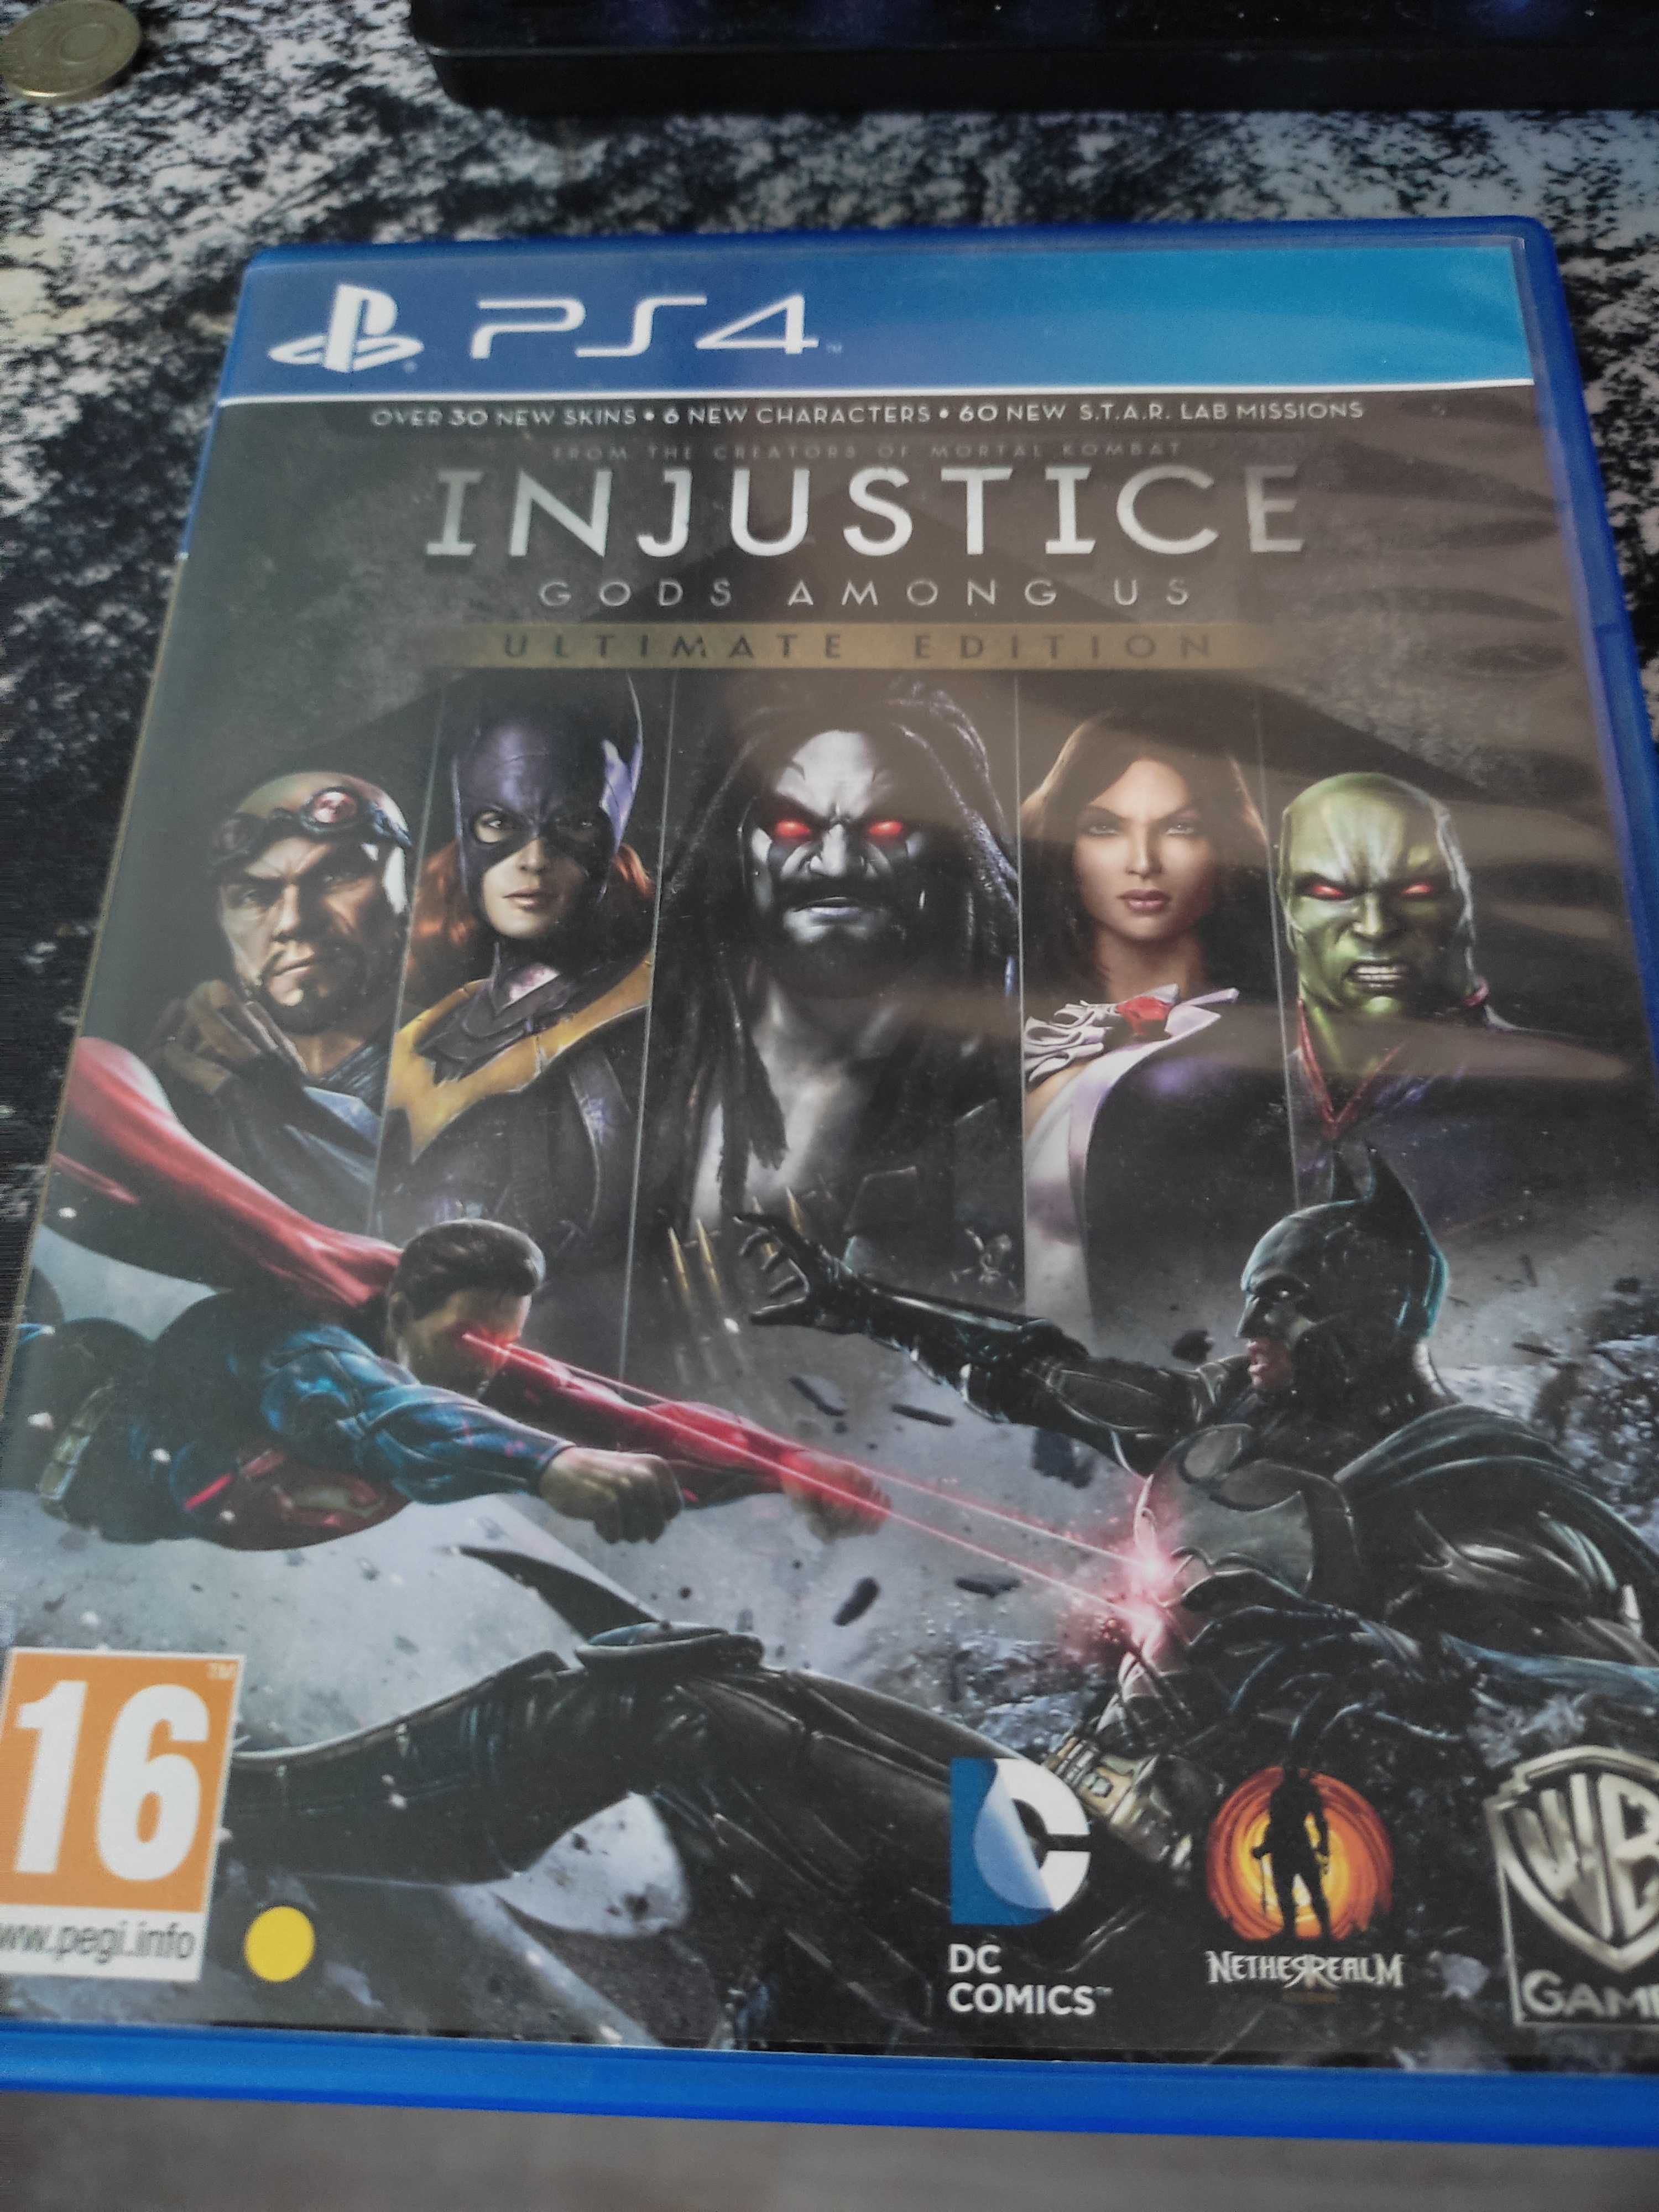 Injustice god's among us ultimate edition